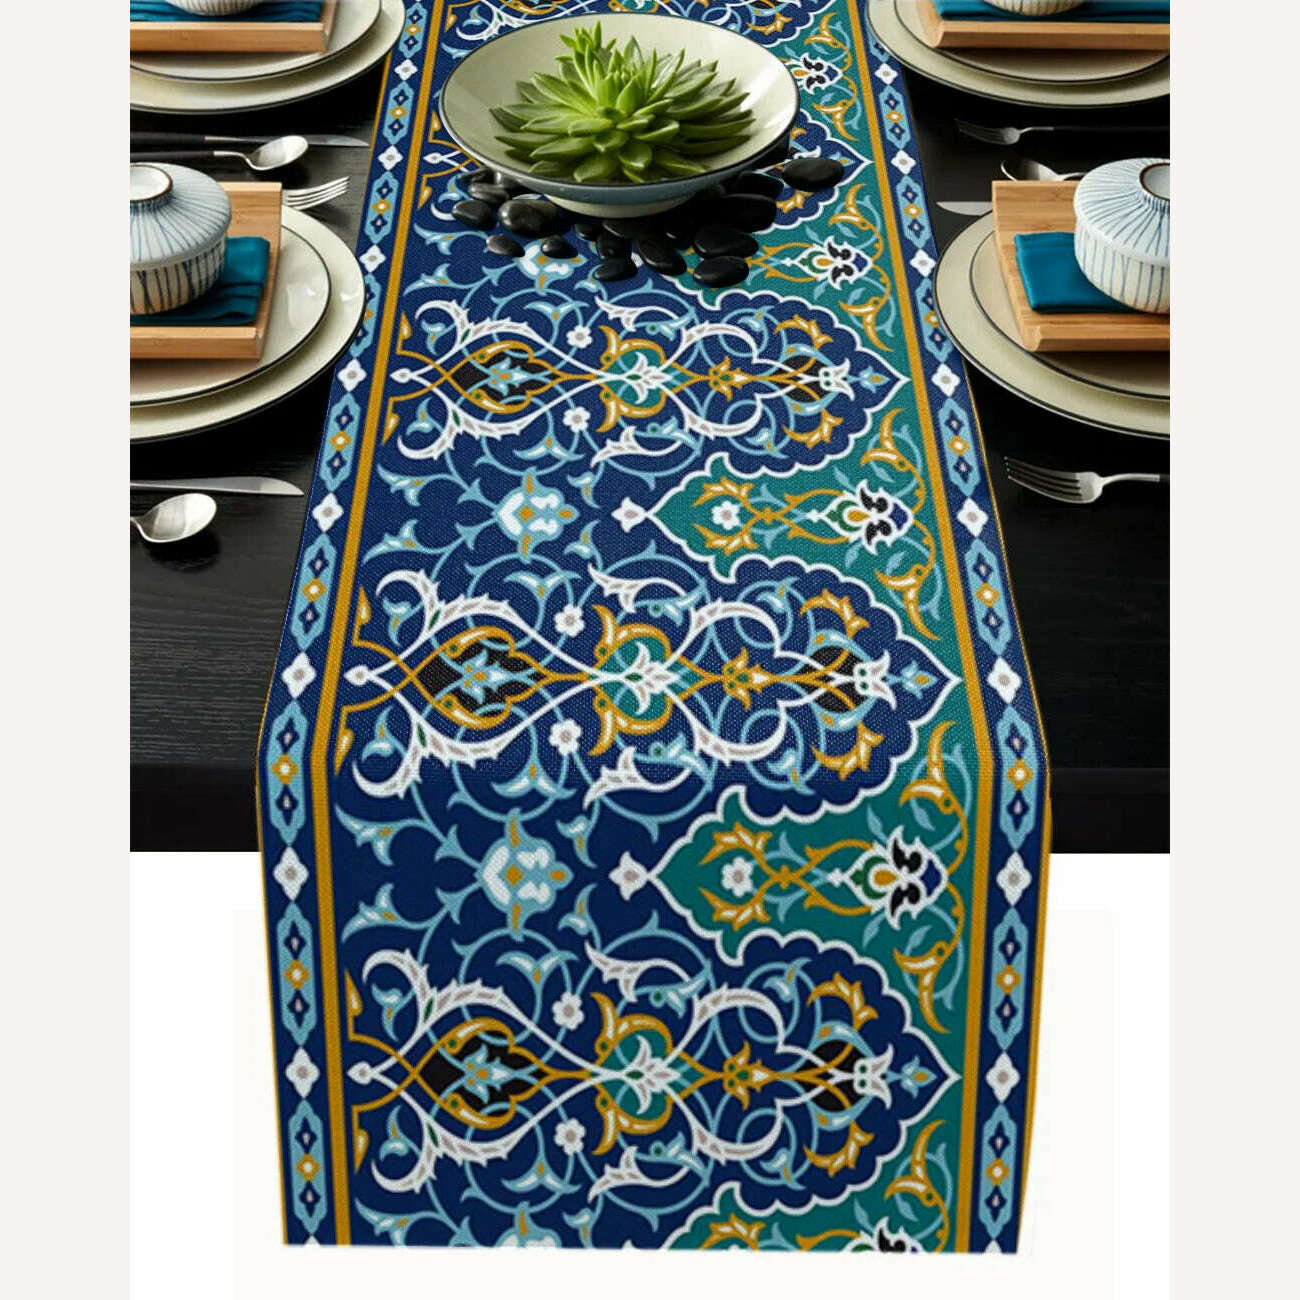 KIMLUD, Linen Burlap Table Runner Colorful Morocco Flowers Islam Arabesque Kitchen Table Runners Dinner Party Wedding Events Decor, LEX05421 / 180x33cm70x13inch, KIMLUD Womens Clothes